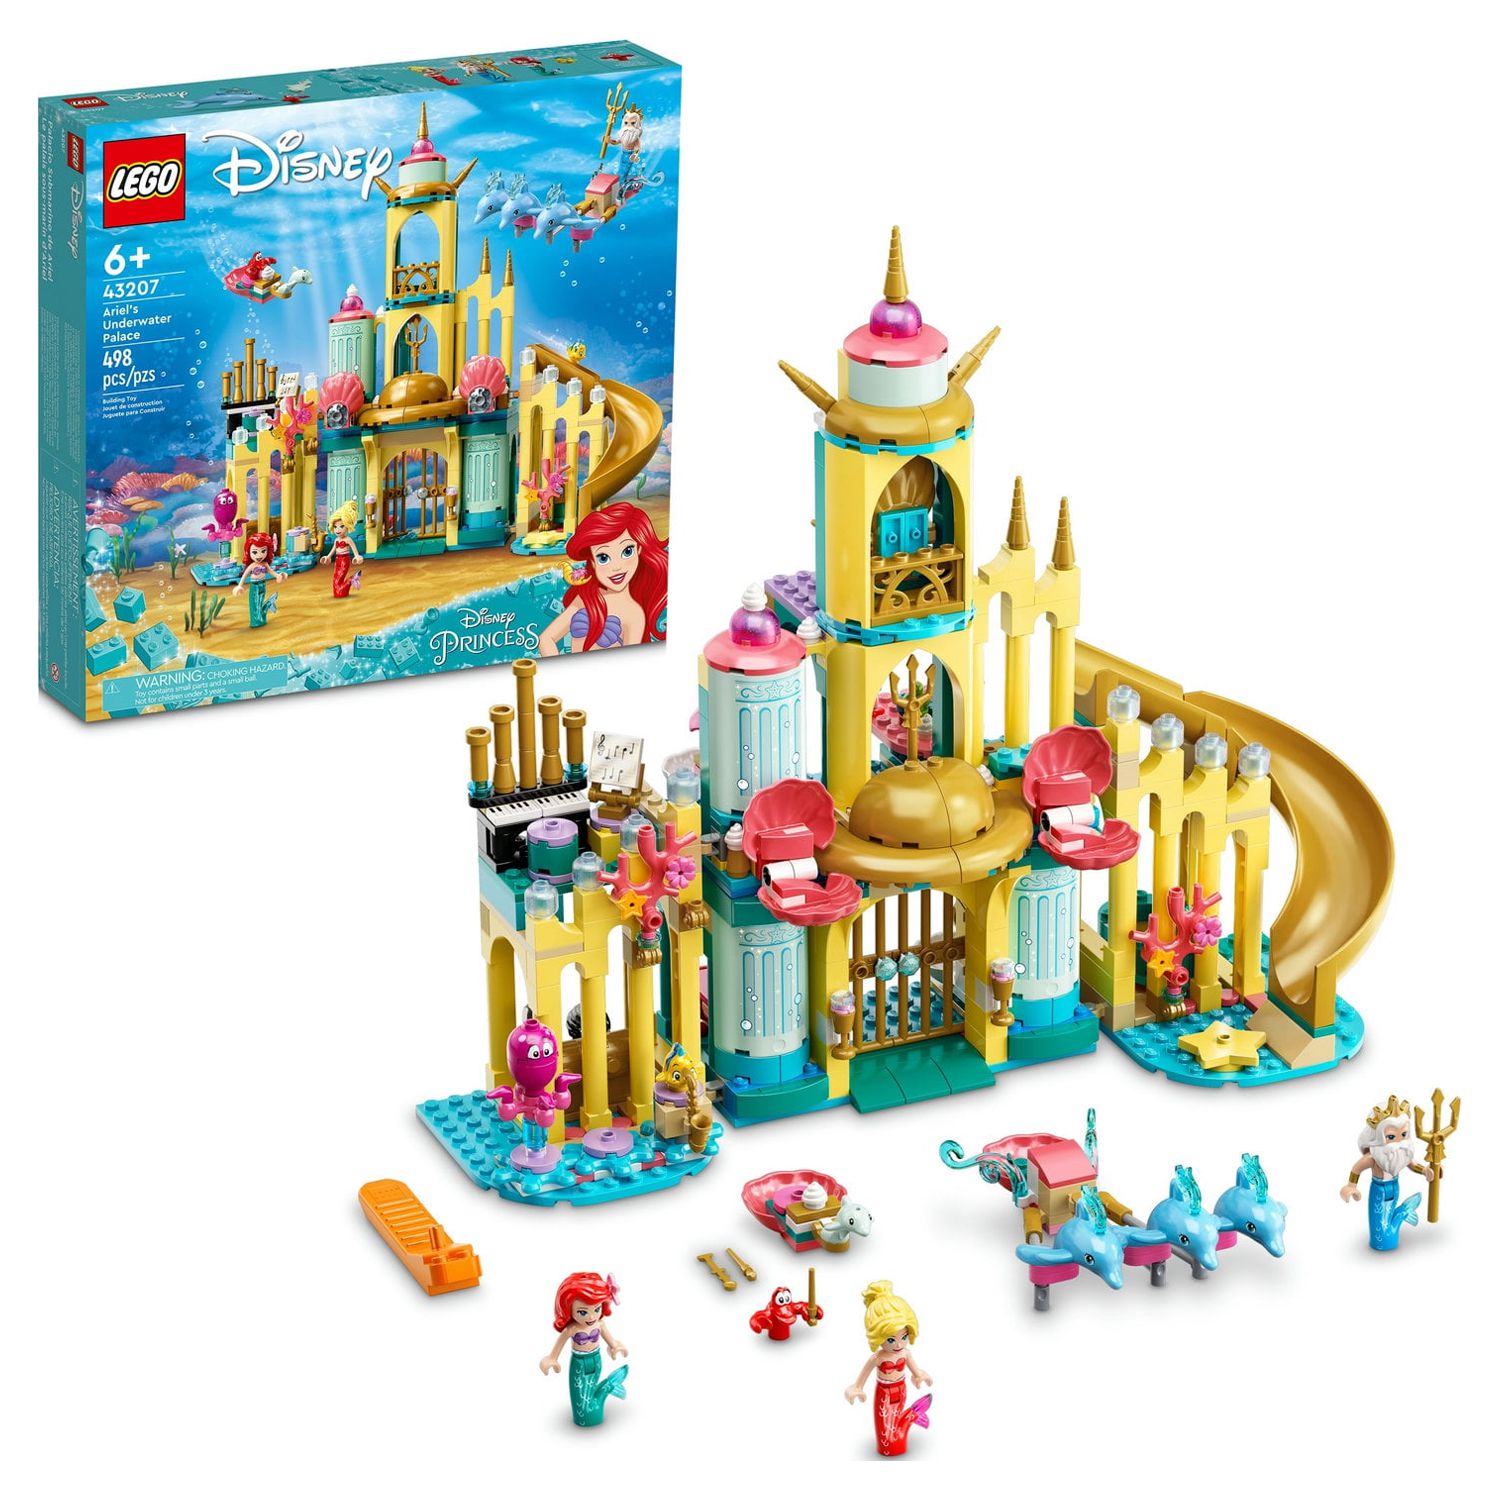 LEGO Disney Princess Ariel’s Underwater Palace 43207, Buildable Princess Castle Toy, Disney Gift Idea for Kids, Girls and Boys Aged 6+ with The Little Mermaid Mini-Doll Figure & Dolphin Figures - image 1 of 10